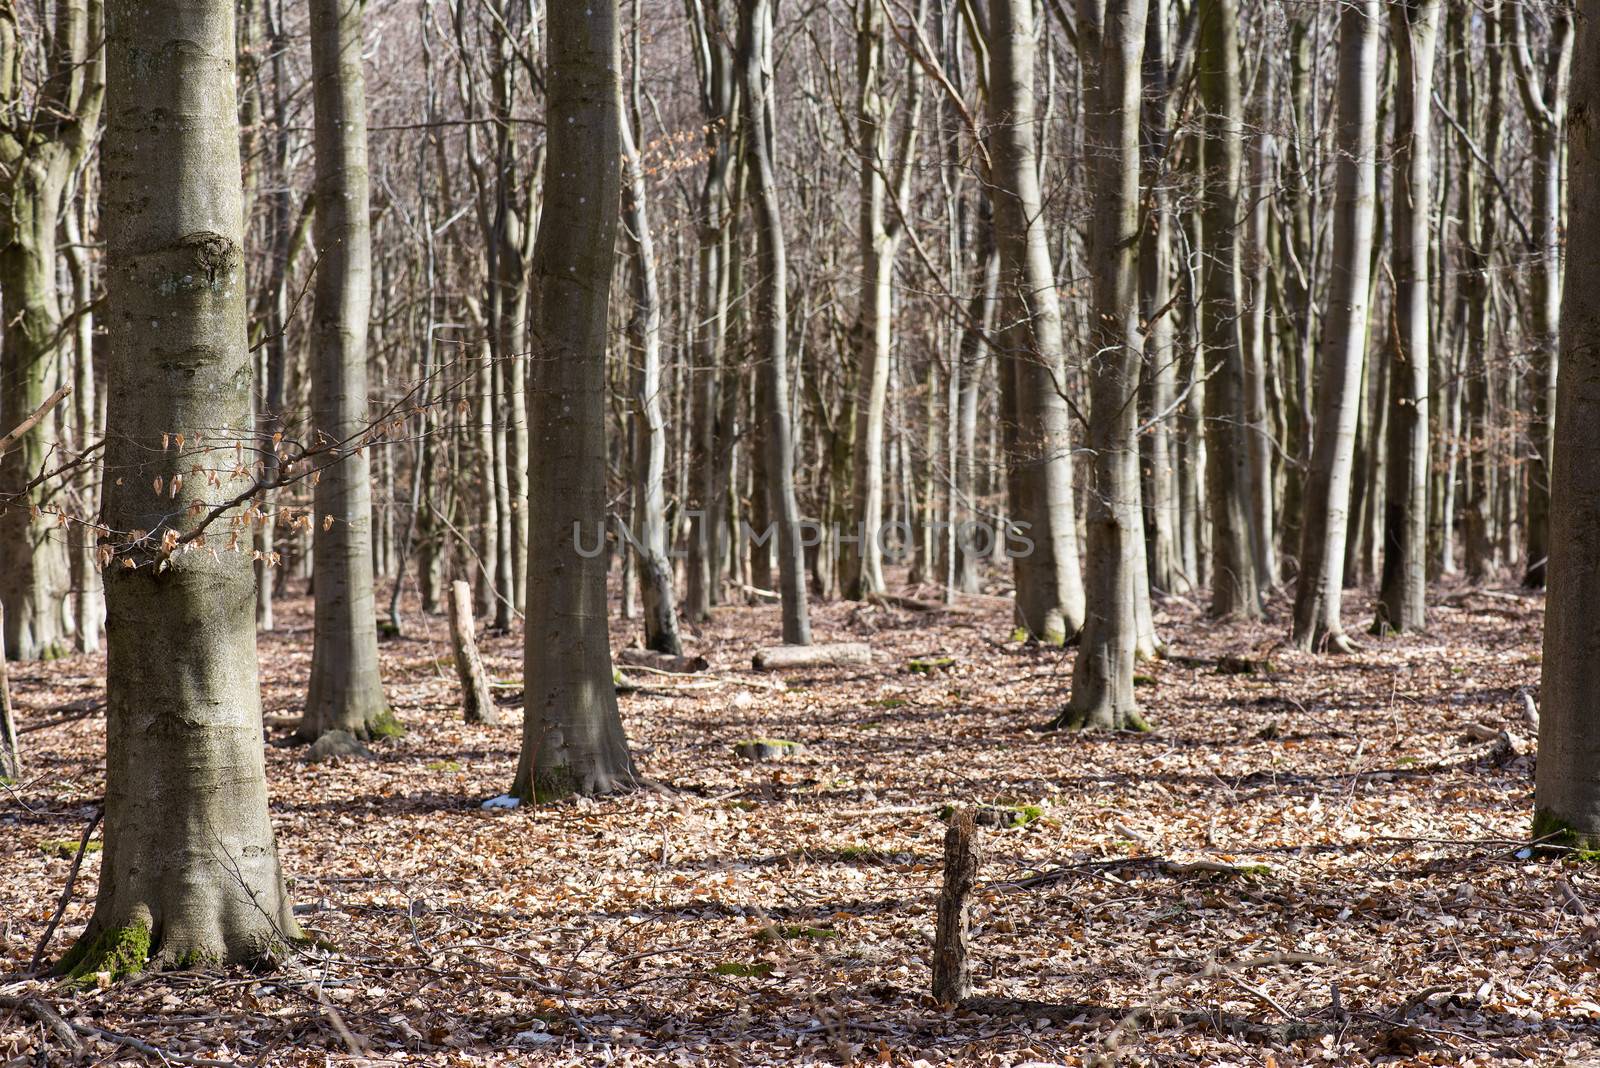 Bright beech forest in spring without any leaves yet